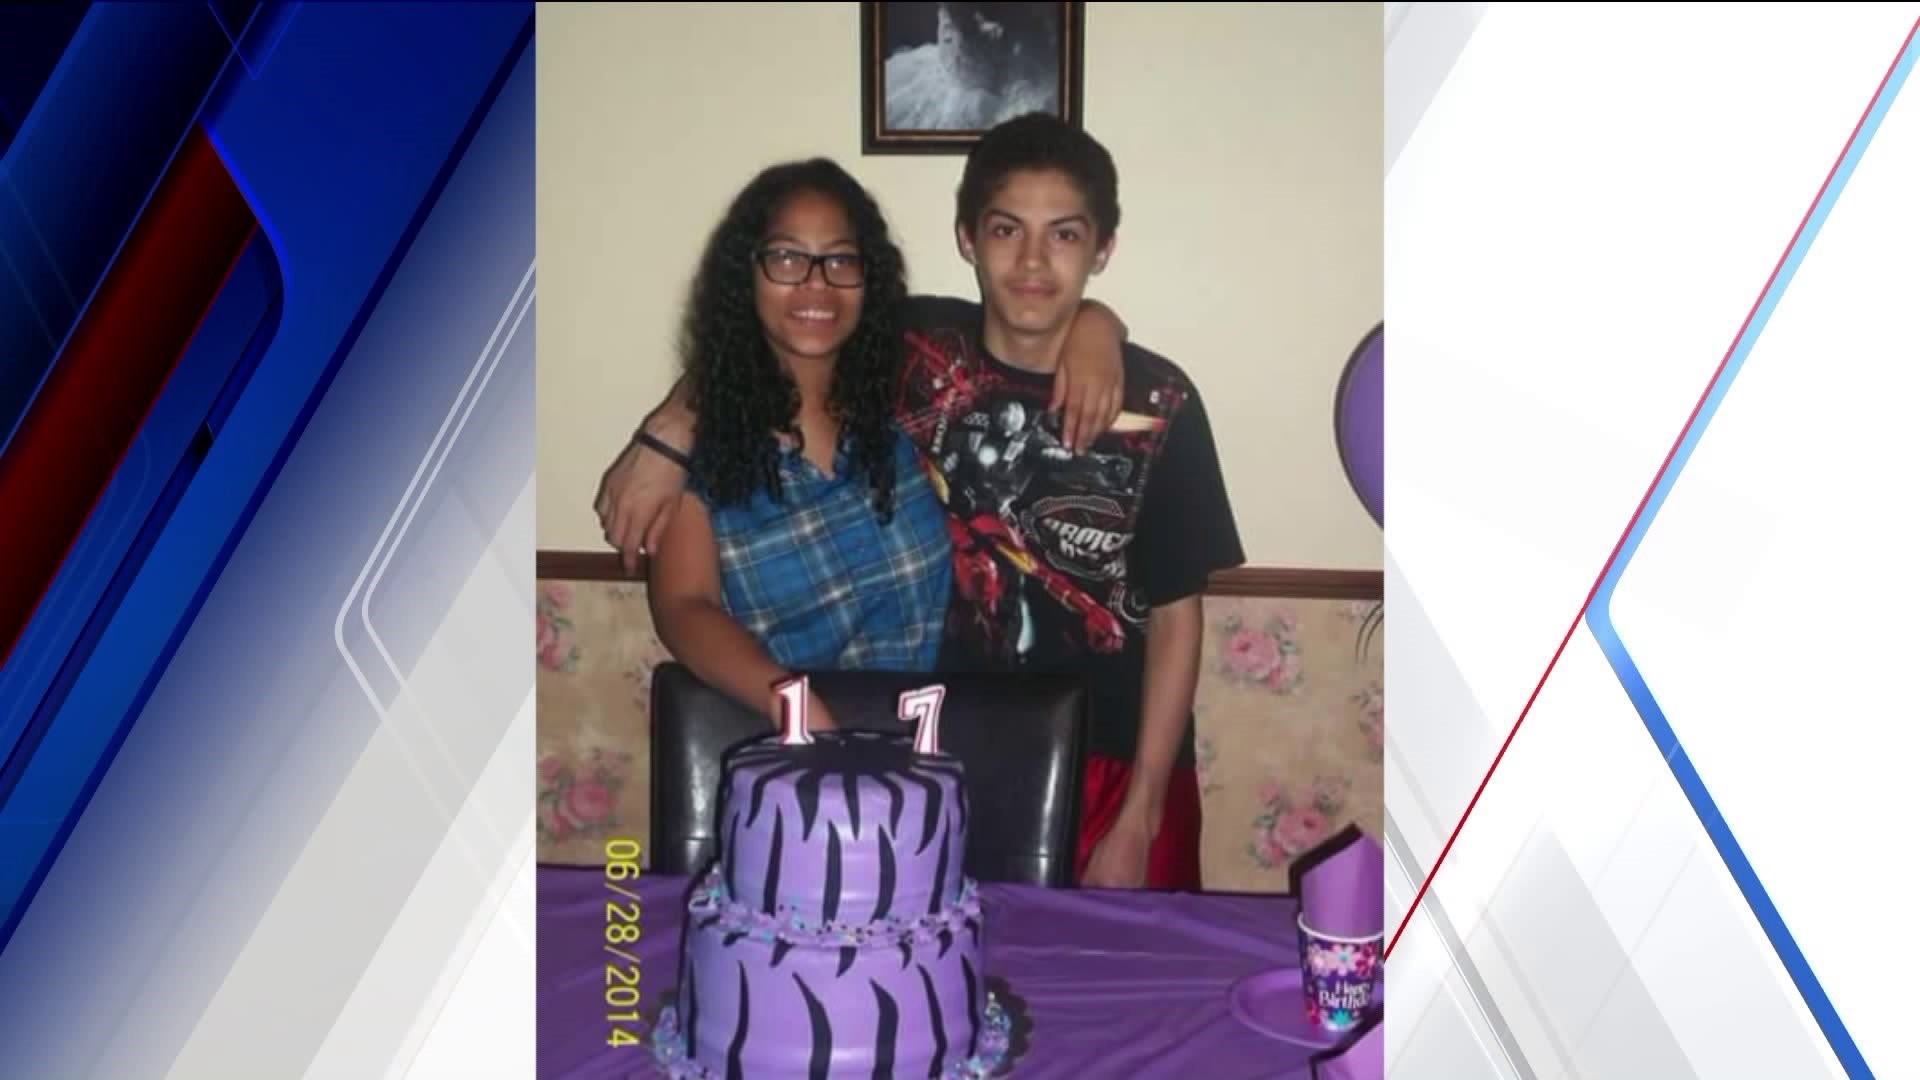 Family of Meriden teen who died trying to save his sister, speaks out for the first time